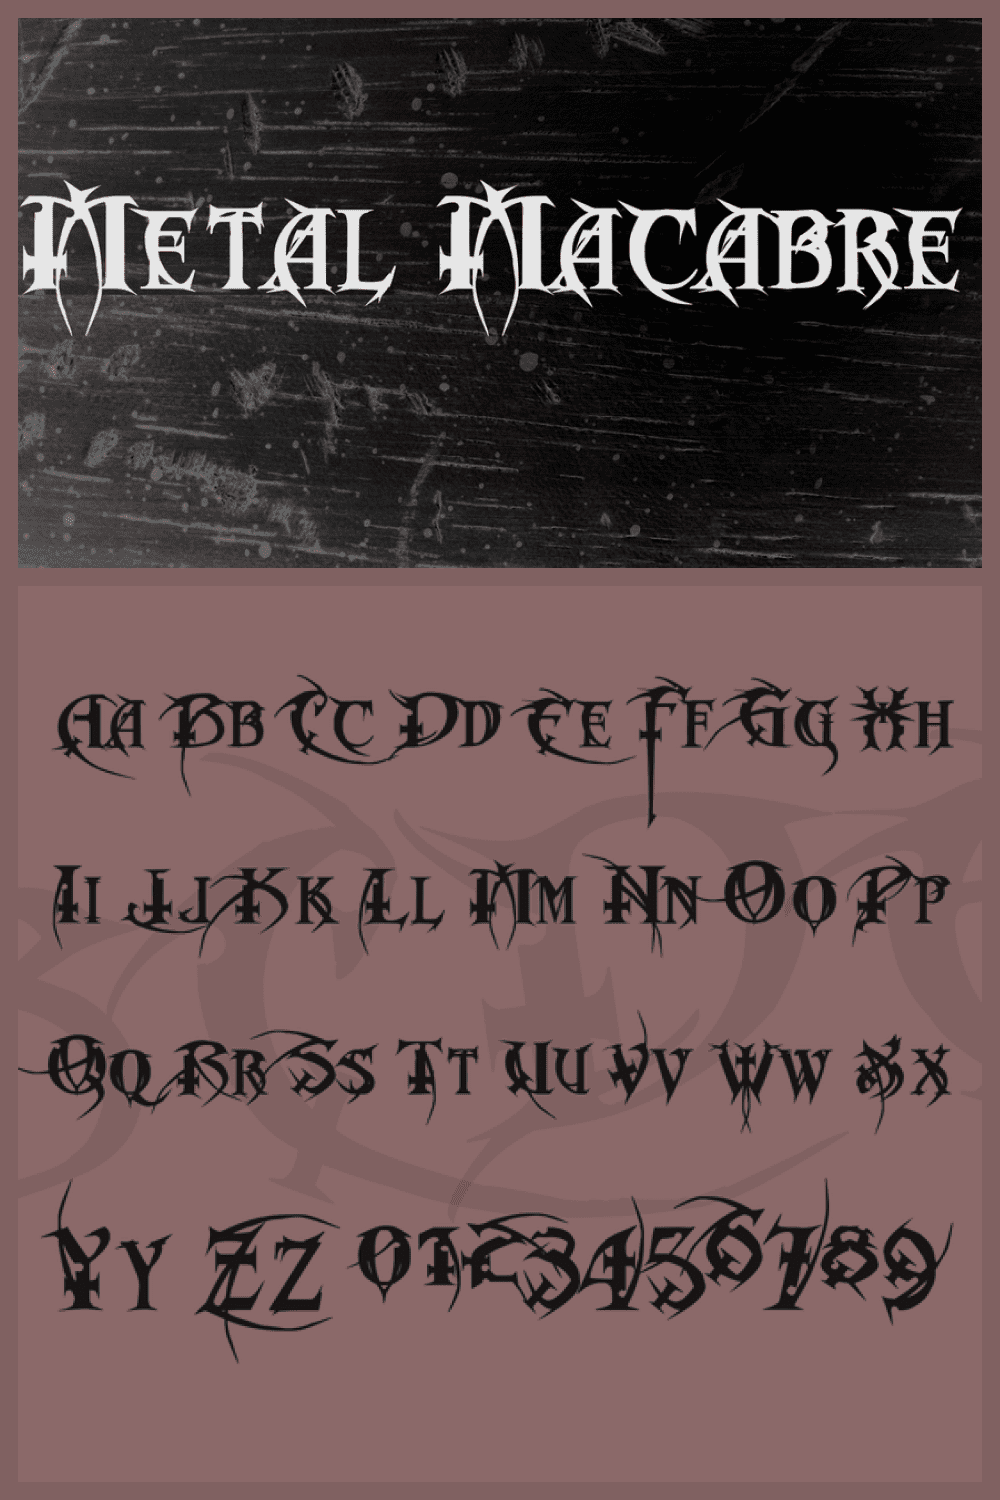 Gothic style font for real rockers.